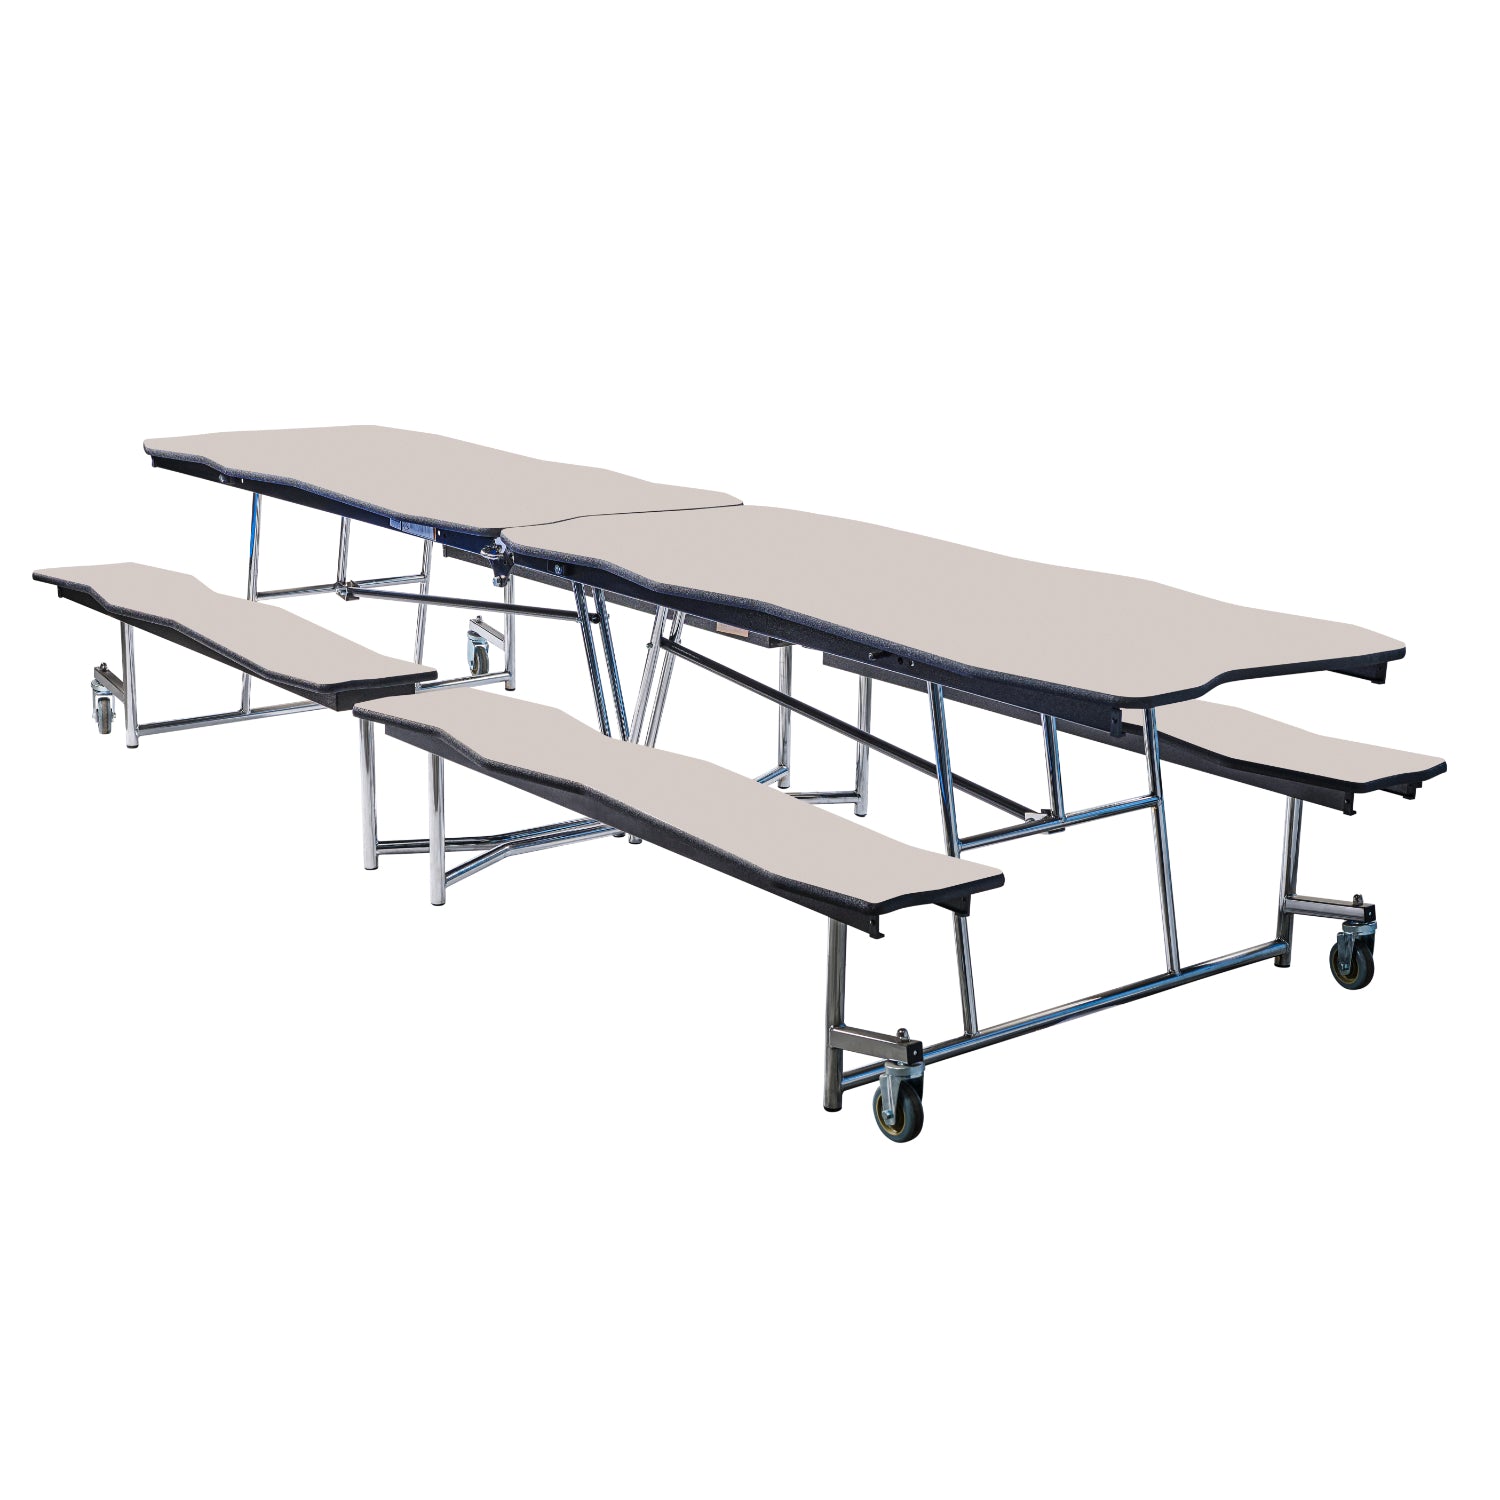 Mobile Cafeteria Table with Benches, 12' Bedrock, Particleboard Core, Vinyl T-Mold Edge, Chrome Frame